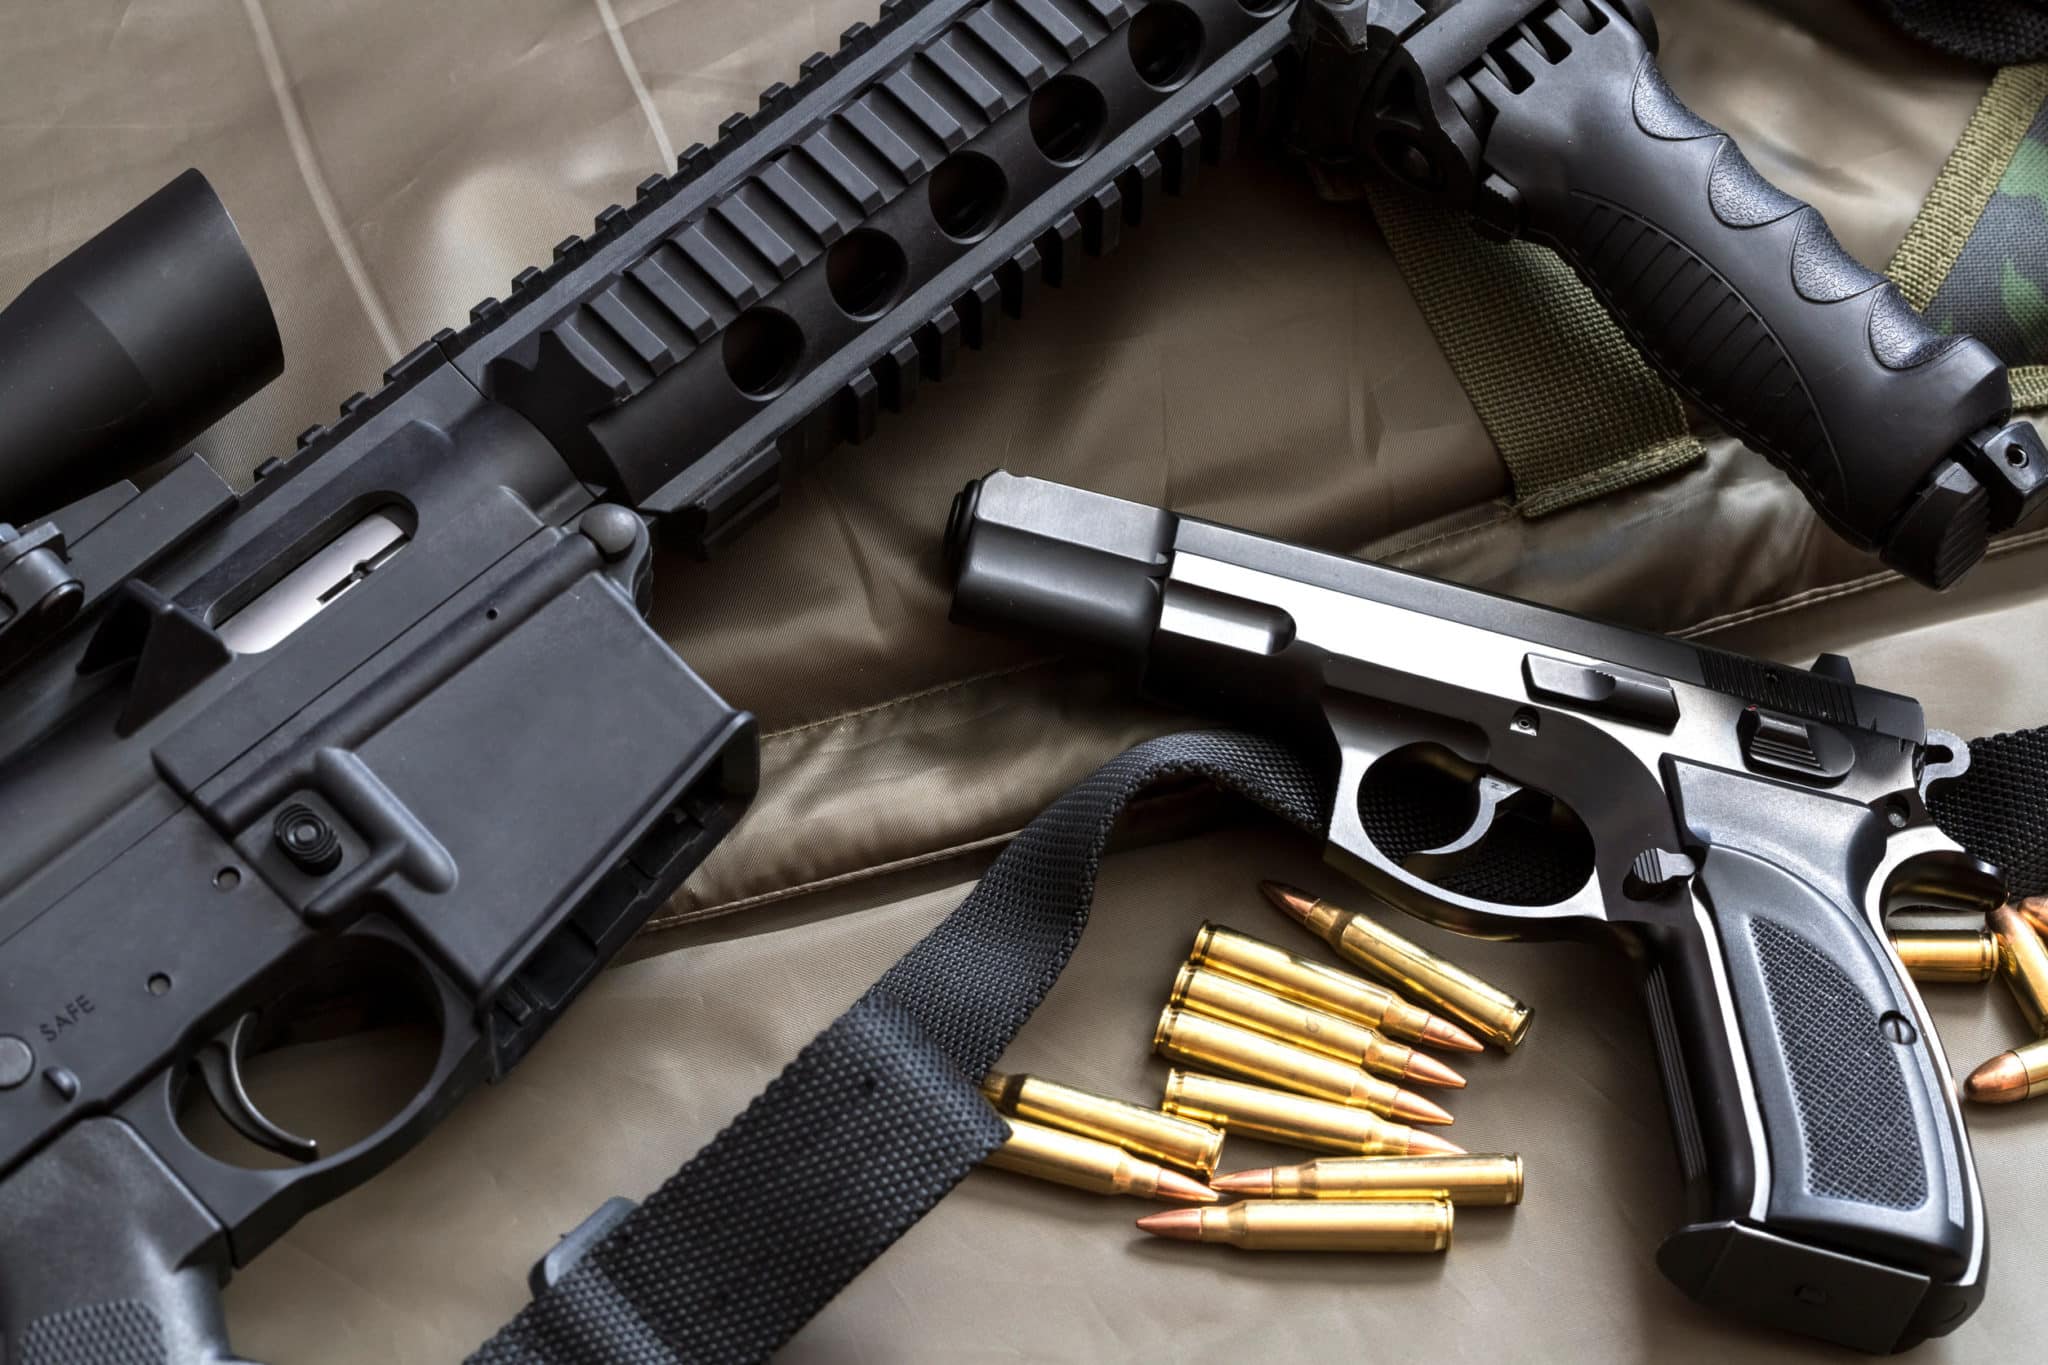 Gun Violence and Use of the Federal Firearms Enhancement